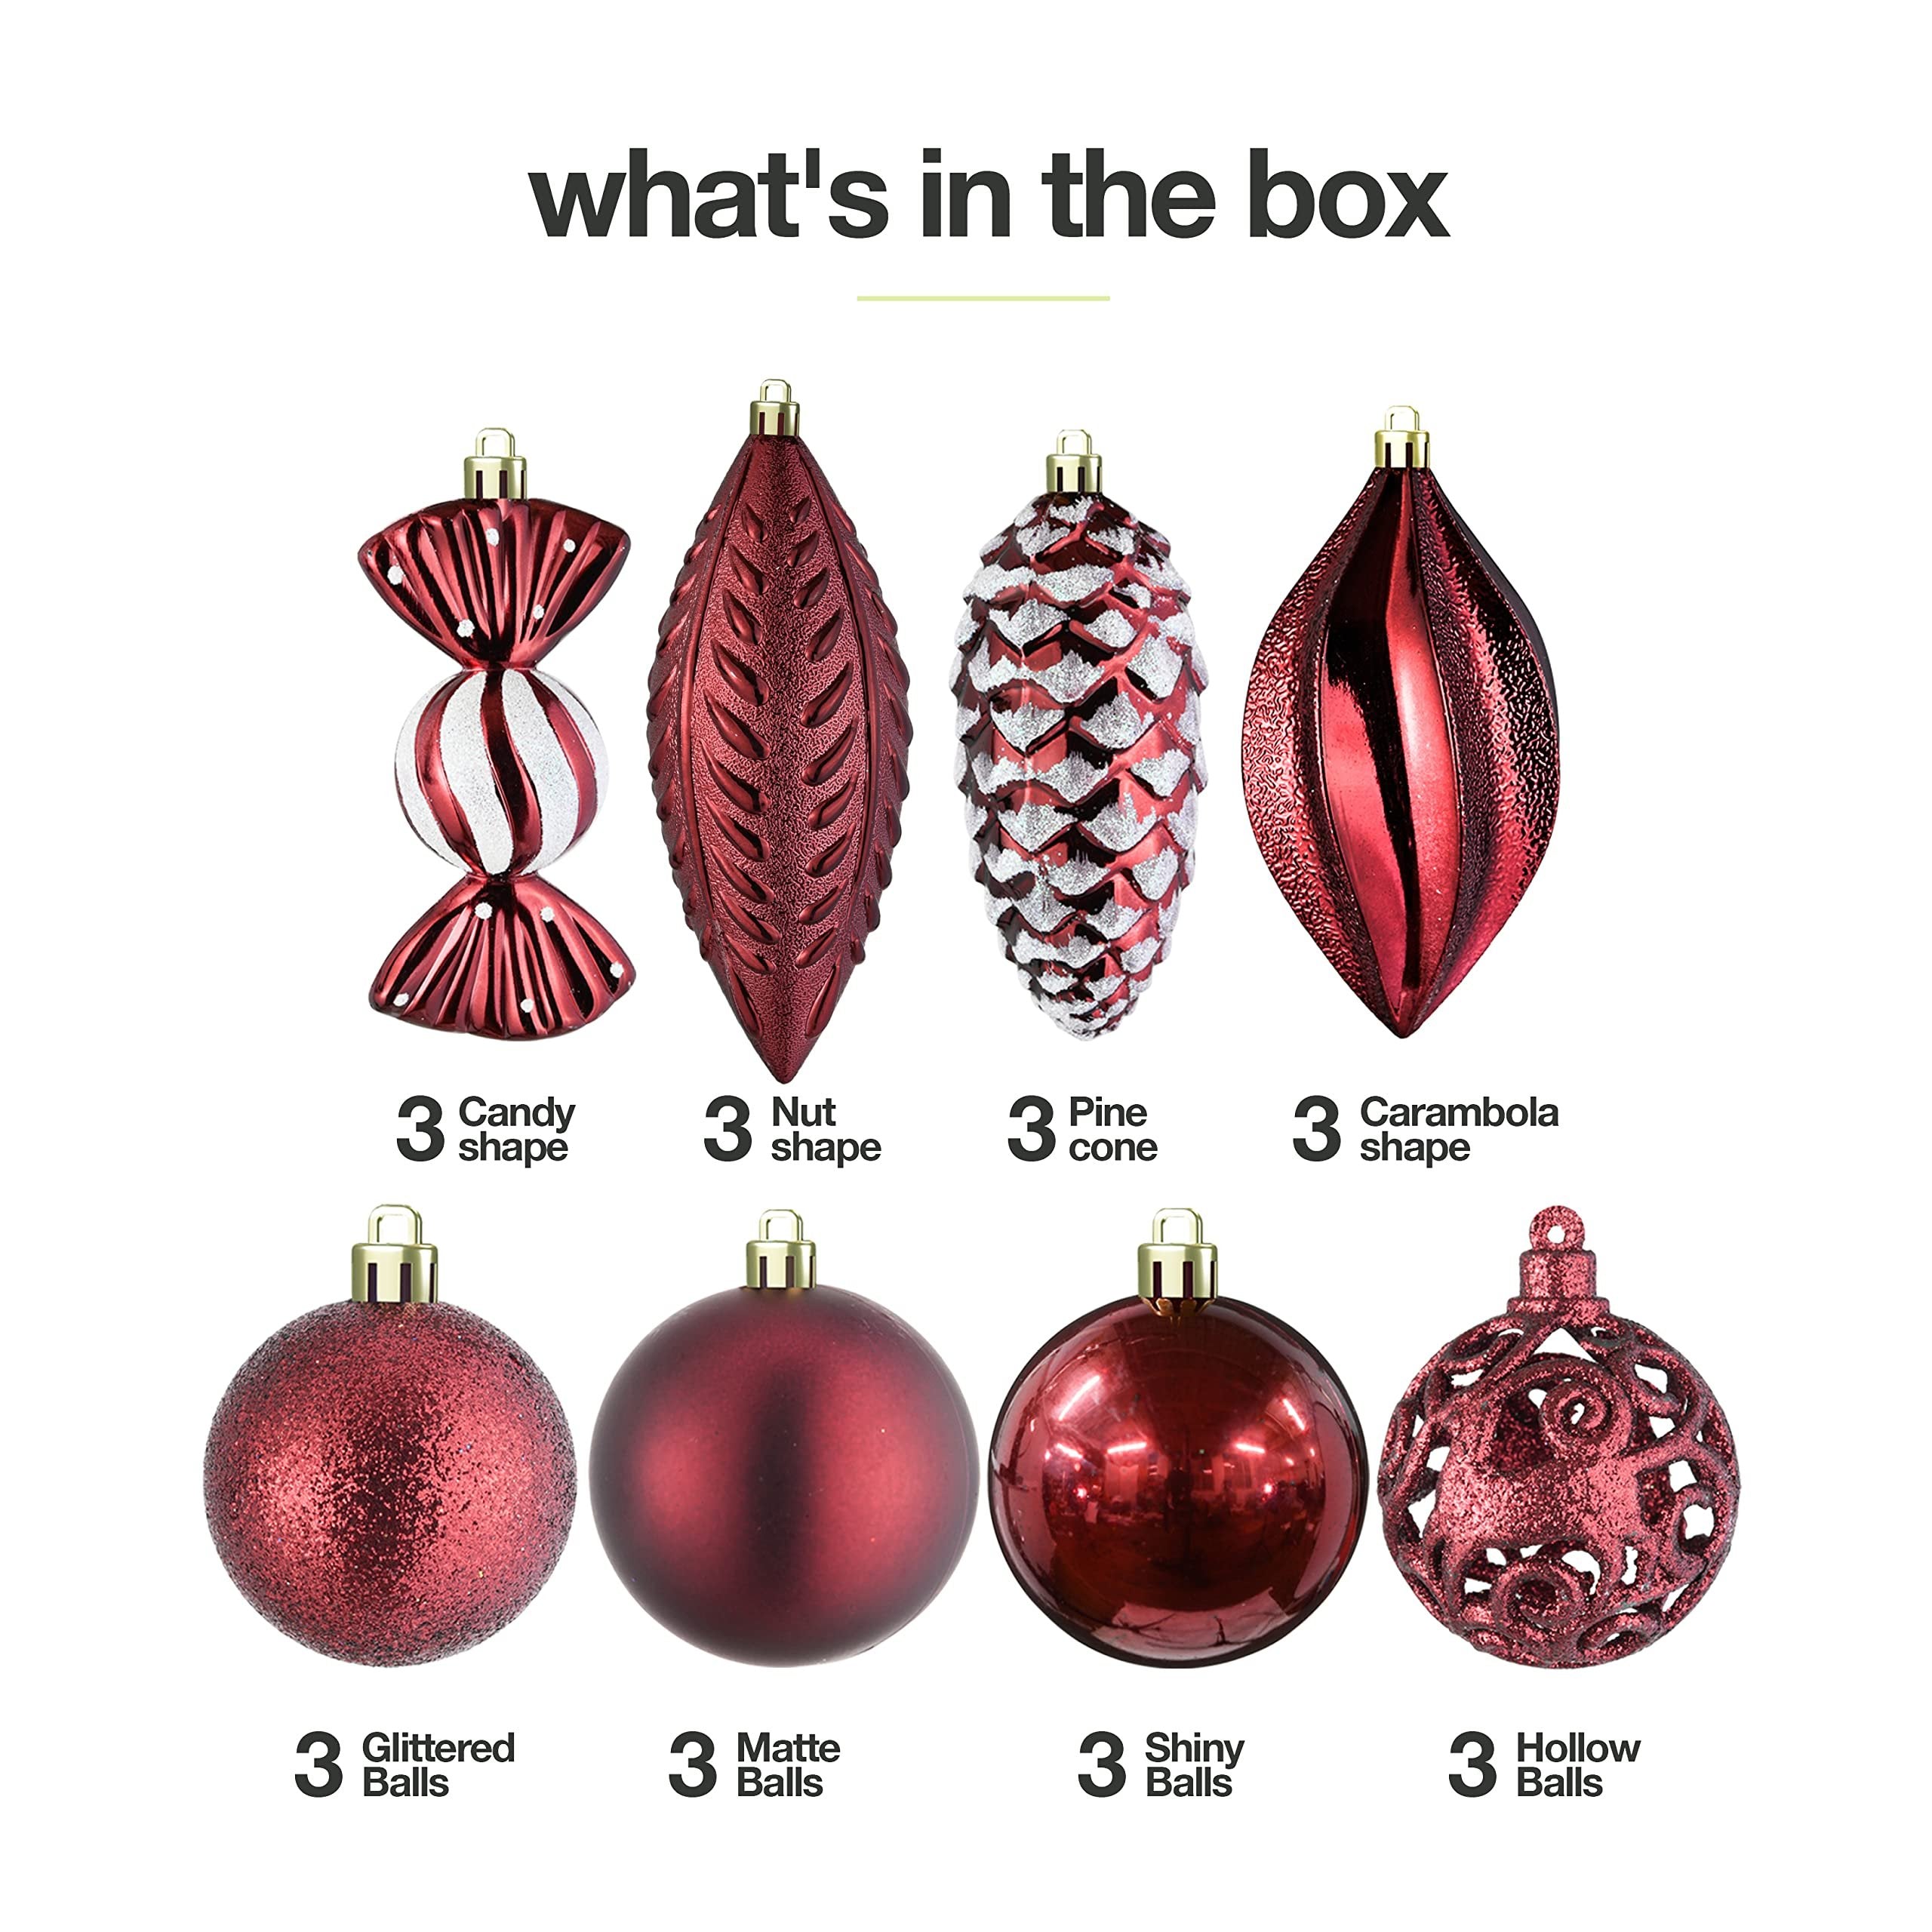 Prextex Christmas Ball Ornaments for Christmas Decorations (Wine Red) | 24 pcs Xmas Tree Shatterproof Ornaments with Hanging Loop for Holiday, Wreath and Party Decorations